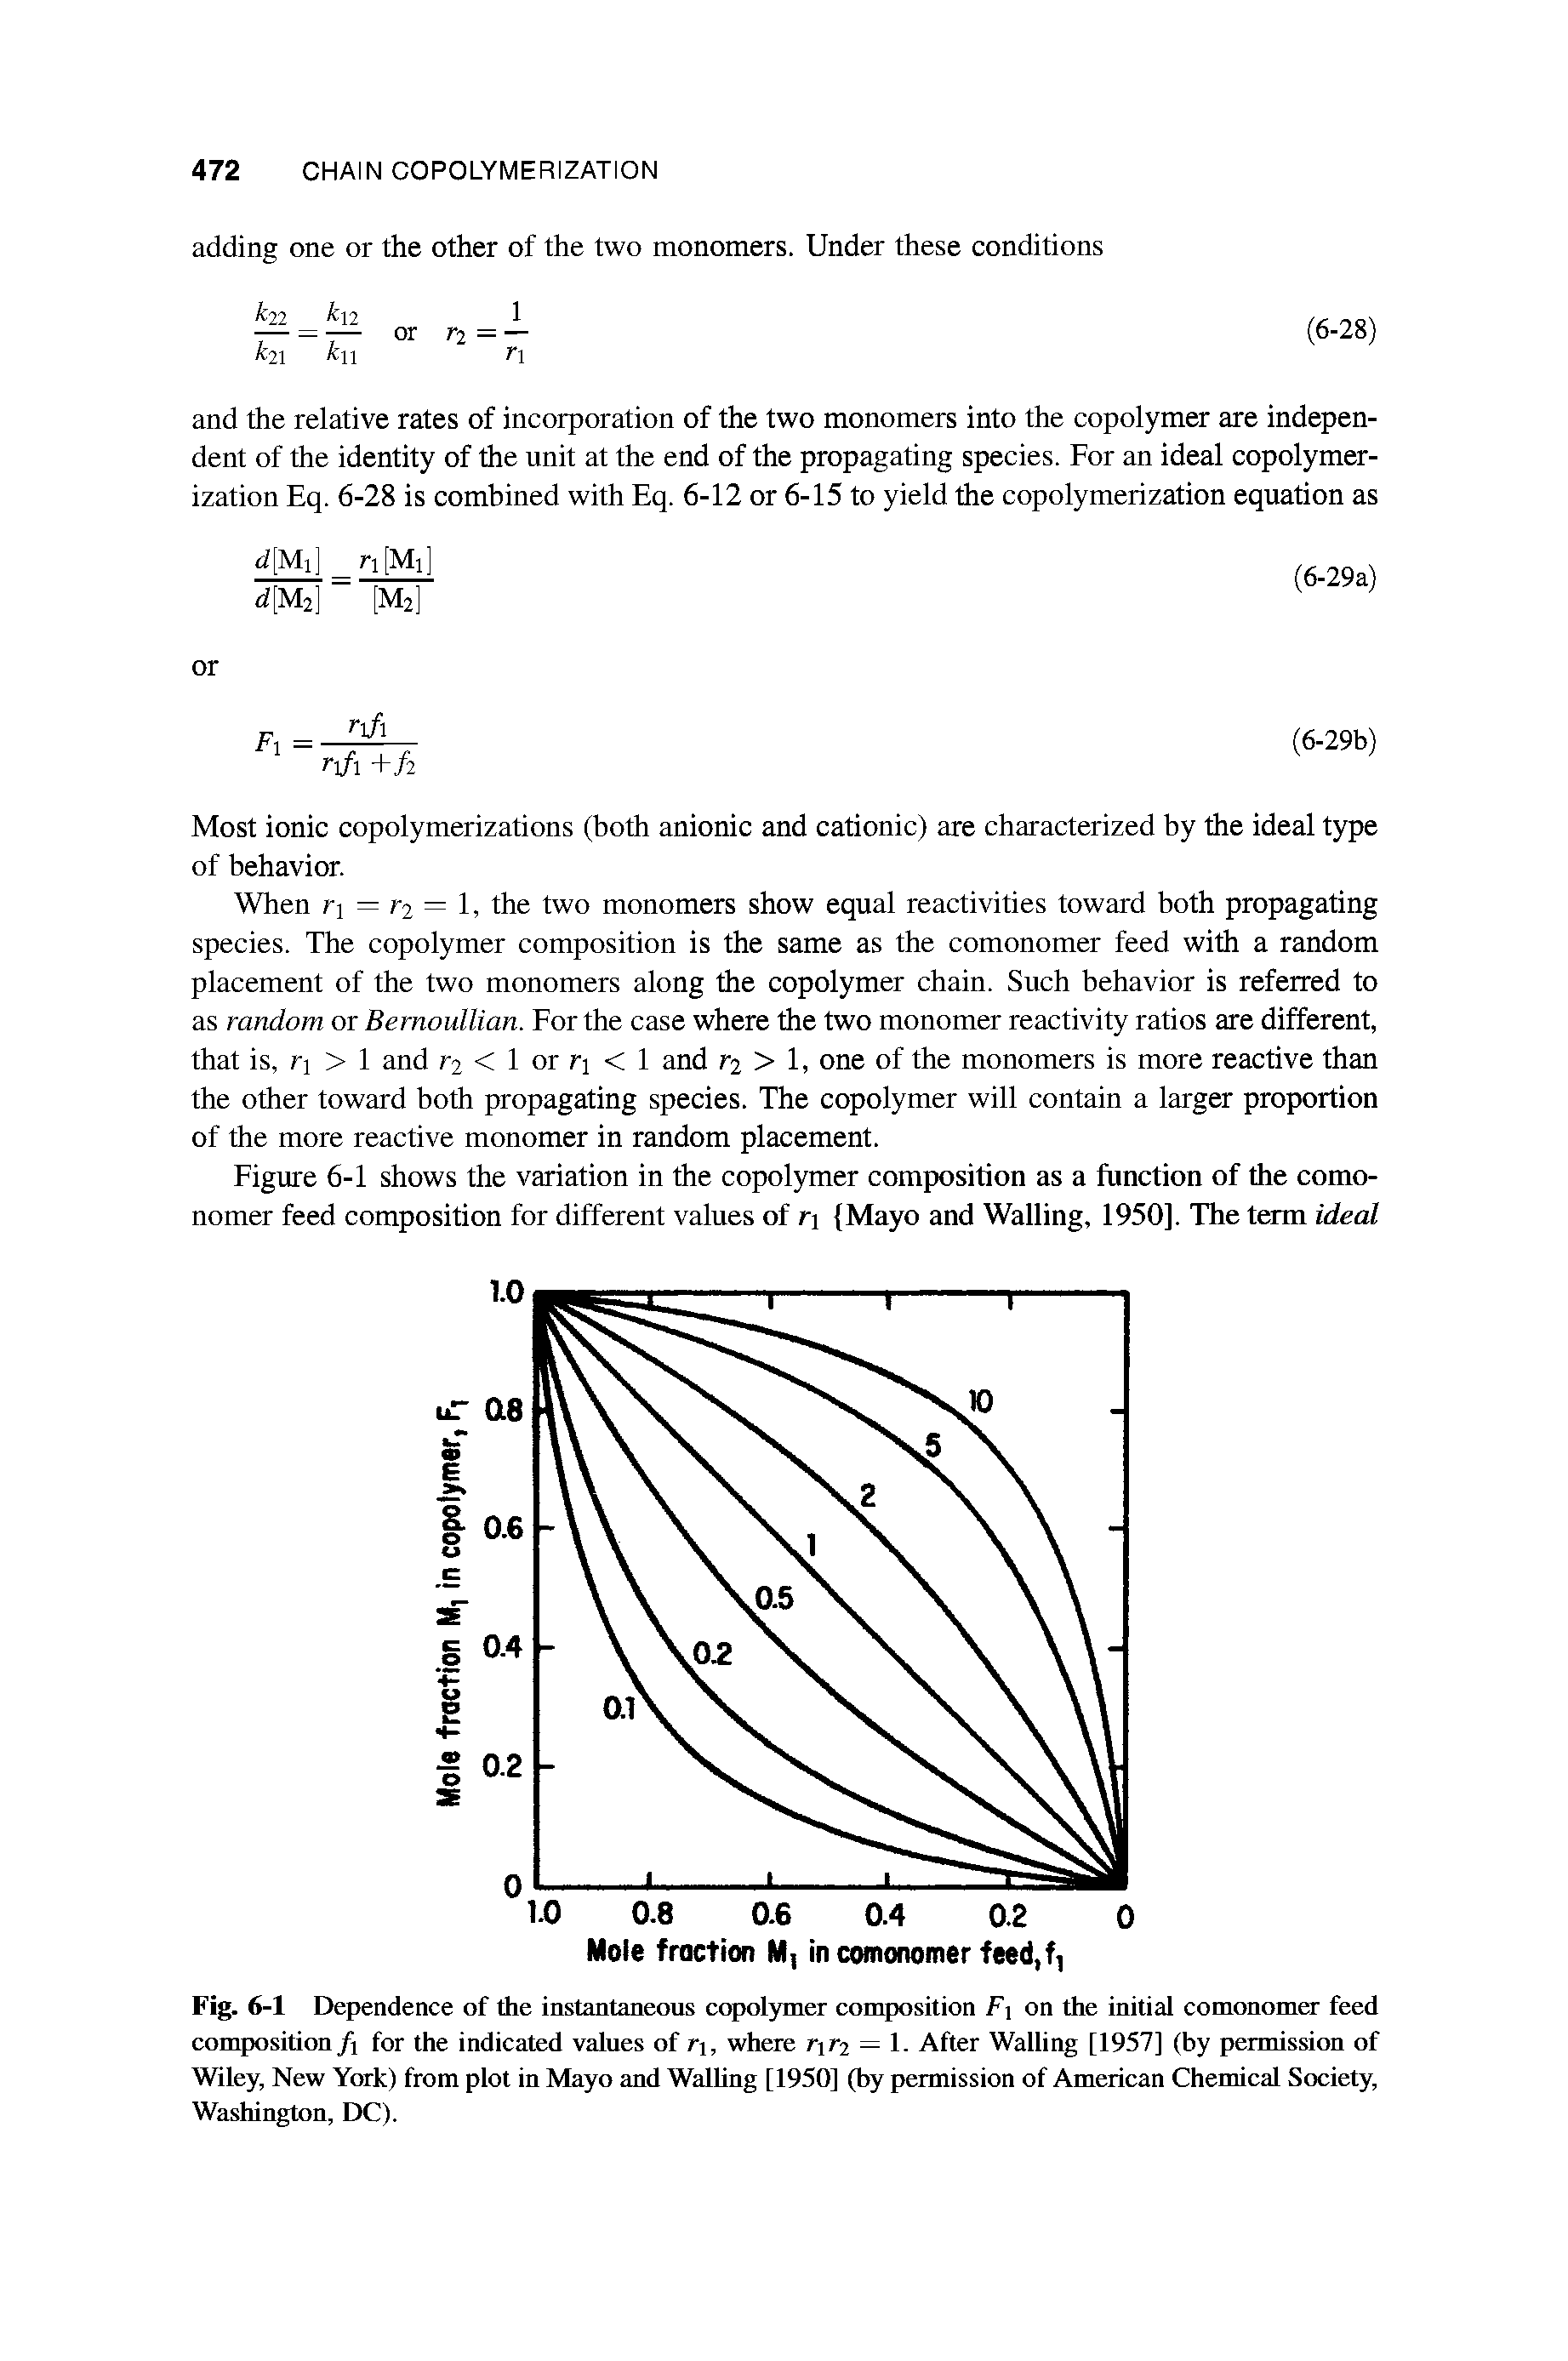 Fig. 6-1 Dependence of the instantaneous copolymer composition F on the initial comonomer feed composition/i for the indicated values of ri, where rir2 — 1. After Walling [1957] (by permission of Wiley, New York) from plot in Mayo and Walling [1950] (by permission of American Chemical Society, Washington, DC).